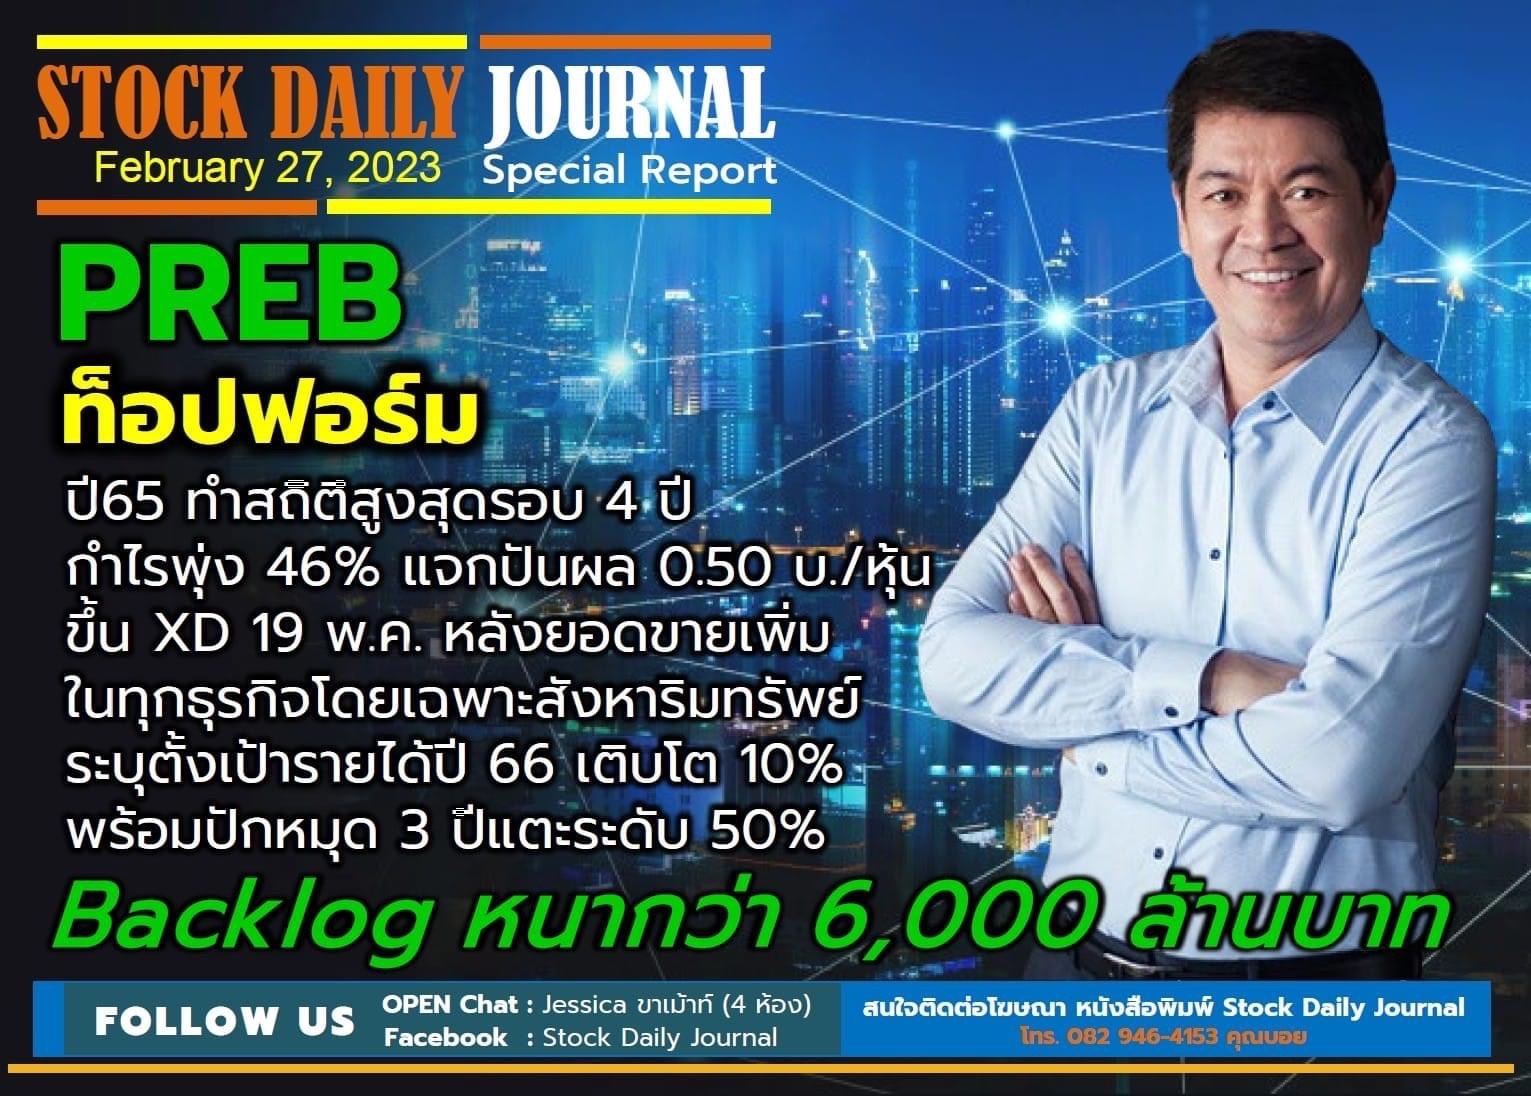 STOCK DAILY JOURNAL “Special Report : PREB”